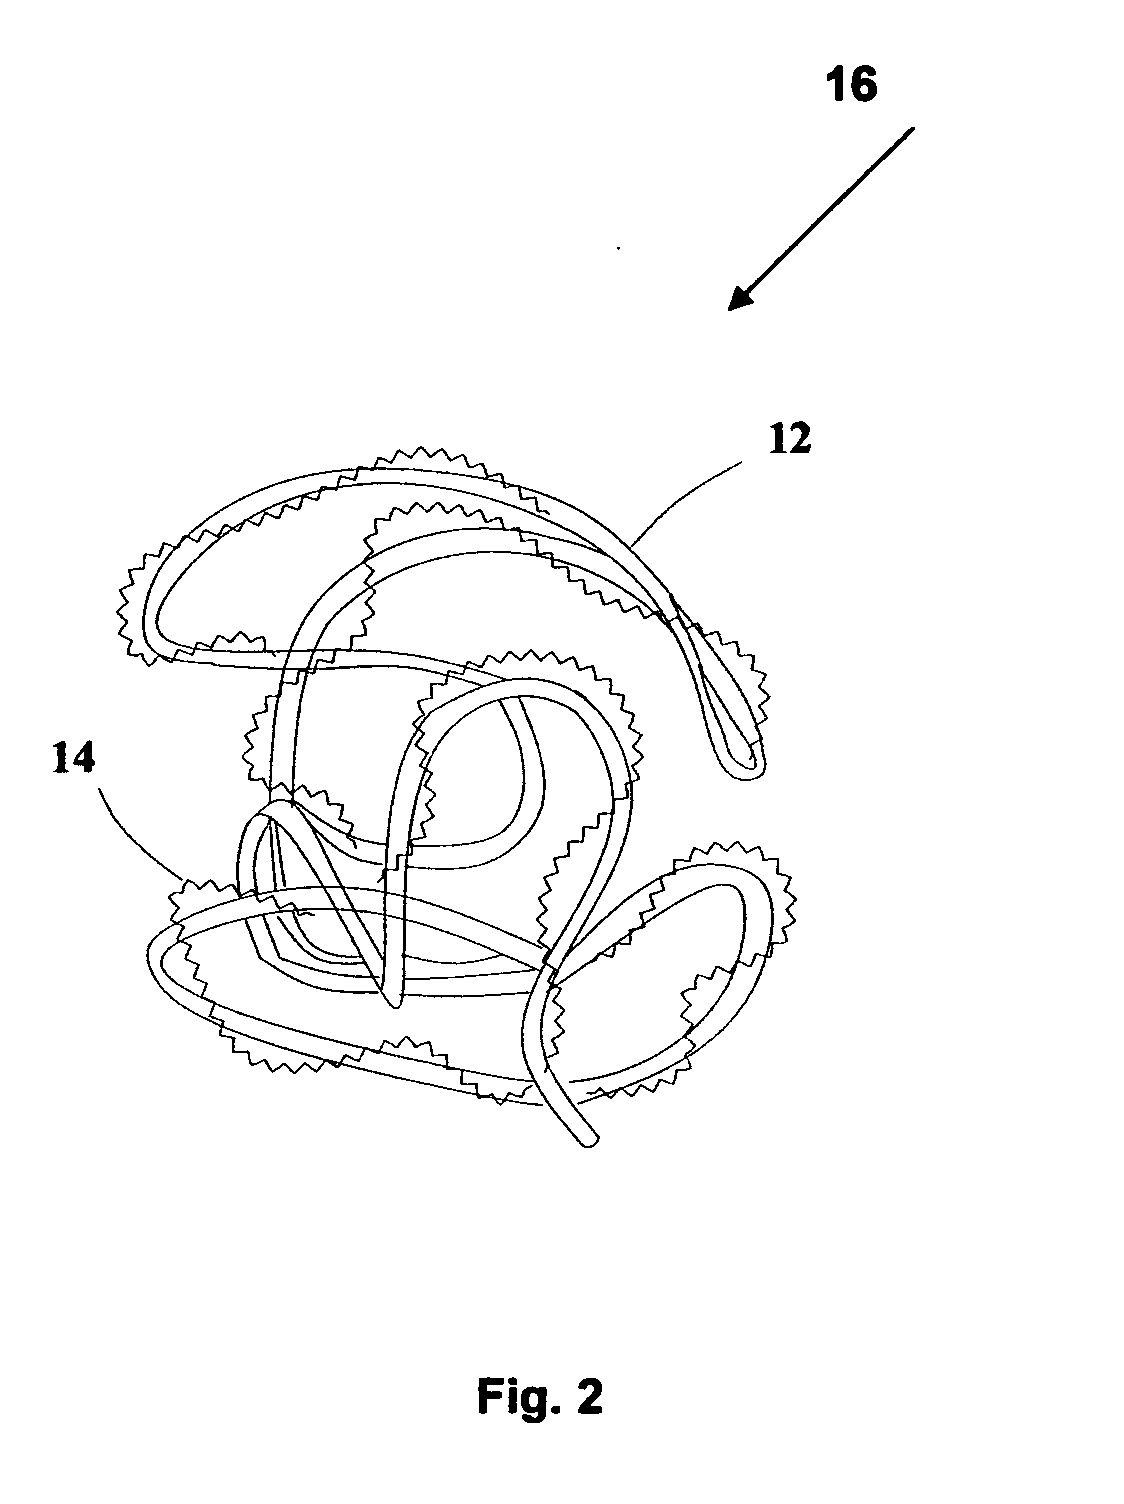 Ebolic apparatus and methods for tumor vasculture system obstruction